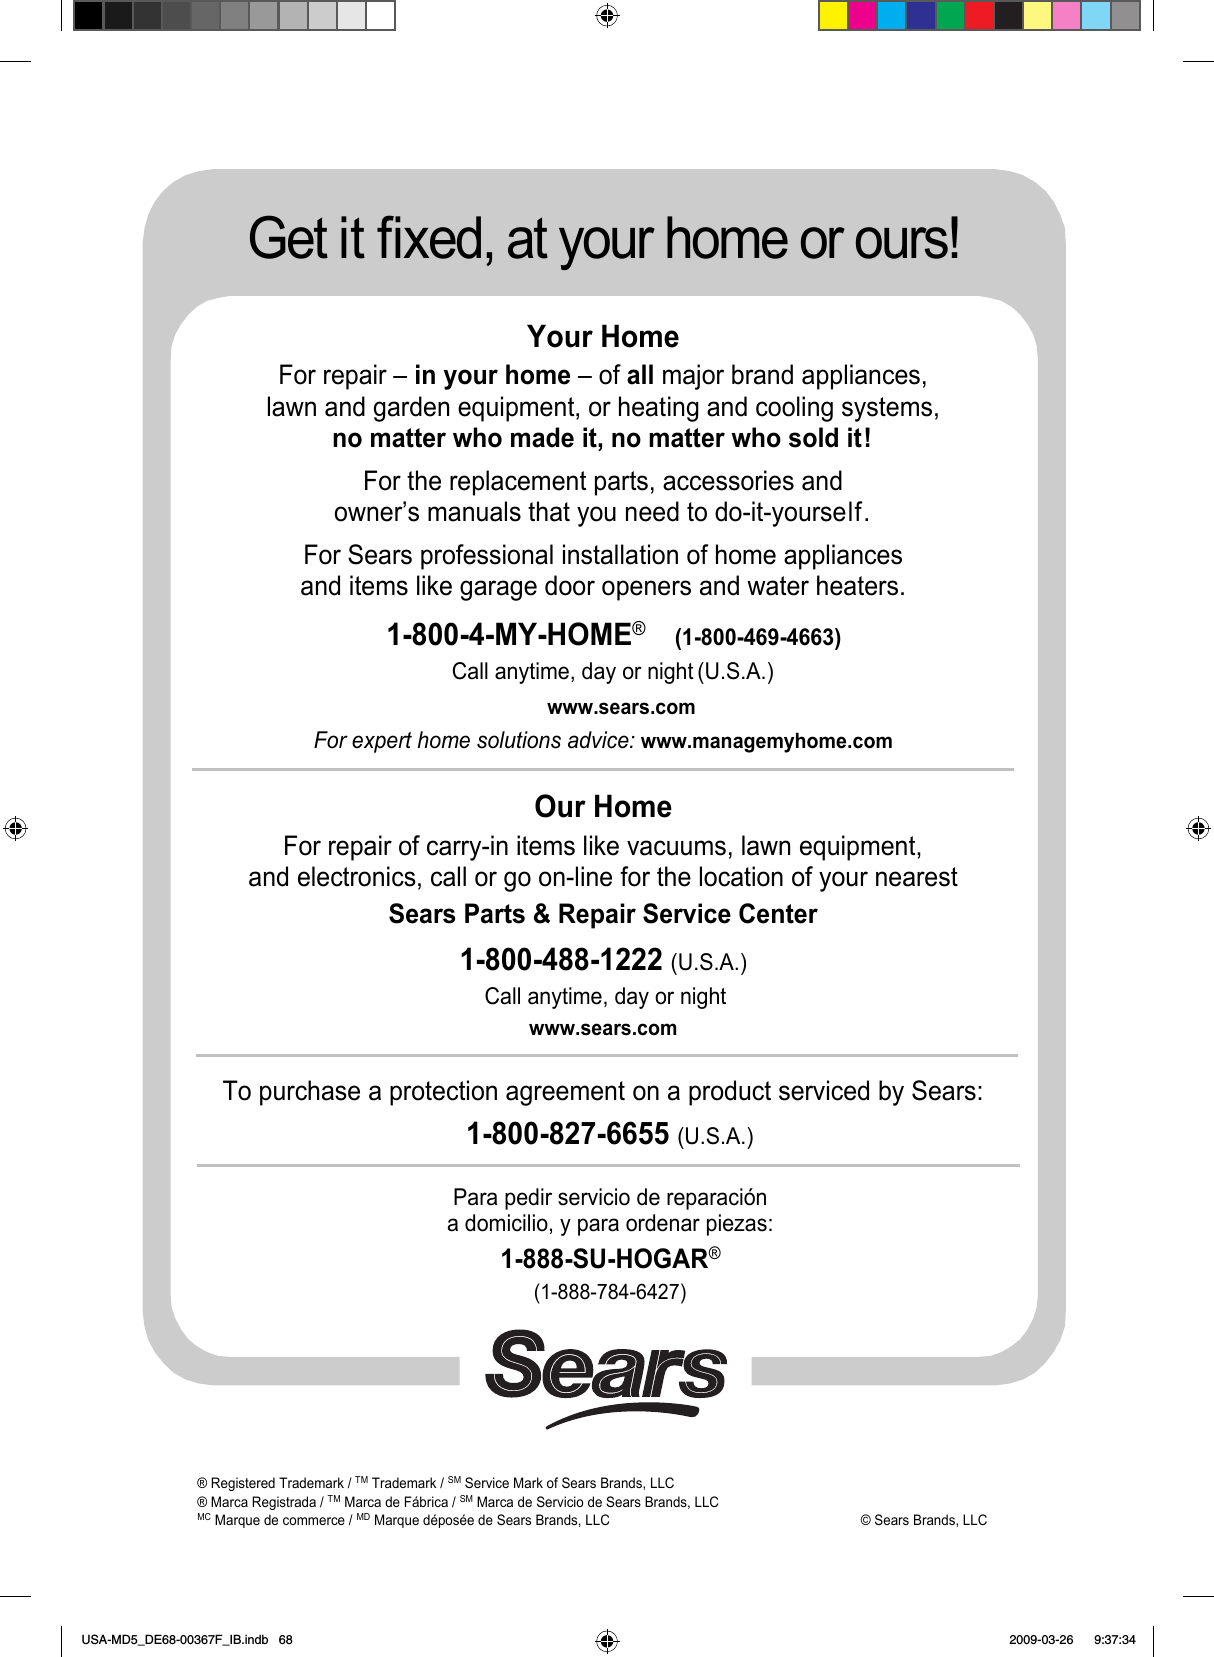 ® Registered Trademark /TMTrademark /SMService Mark of Sears Brands, LLC® Marca Registrada /TM Marca de Fábrica /SM Marca de Servicio de Sears Brands, LLCMCMarque de commerce /MDMarque déposée de Sears Brands, LLC        © Sears Brands, LLCGet it fixed, at your home or ours!Your HomeFor repair – in your home – of all major brand appliances,lawn and garden equipment, or heating and cooling systems,no matter who made it, no matter who sold it!For the replacement parts, accessories andowner’s manuals that you need to do-it-yourself.For Sears professional installation of home appliancesand items like garage door openers and water heaters.1-800-4-MY-HOME®(1-800-469-4663)Call anytime, day or night (U.S.A.)www.sears.comFor expert home solutions advice: www.managemyhome.comOur HomeFor repair of carry-in items like vacuums, lawn equipment,and electronics, call or go on-line for the location of your nearest Sears Parts &amp; Repair Service Center1-800-488-1222 (U.S.A.)Call anytime, day or nightwww.sears.comTo purchase a protection agreement on a product serviced by Sears:1-800-827-6655 (U.S.A.)Para pedir servicio de reparacióna domicilio, y para ordenar piezas:1-888-SU-HOGAR®(1-888-784-6427)USA-MD5_DE68-00367F_IB.indb   68 2009-03-26    9:37:34